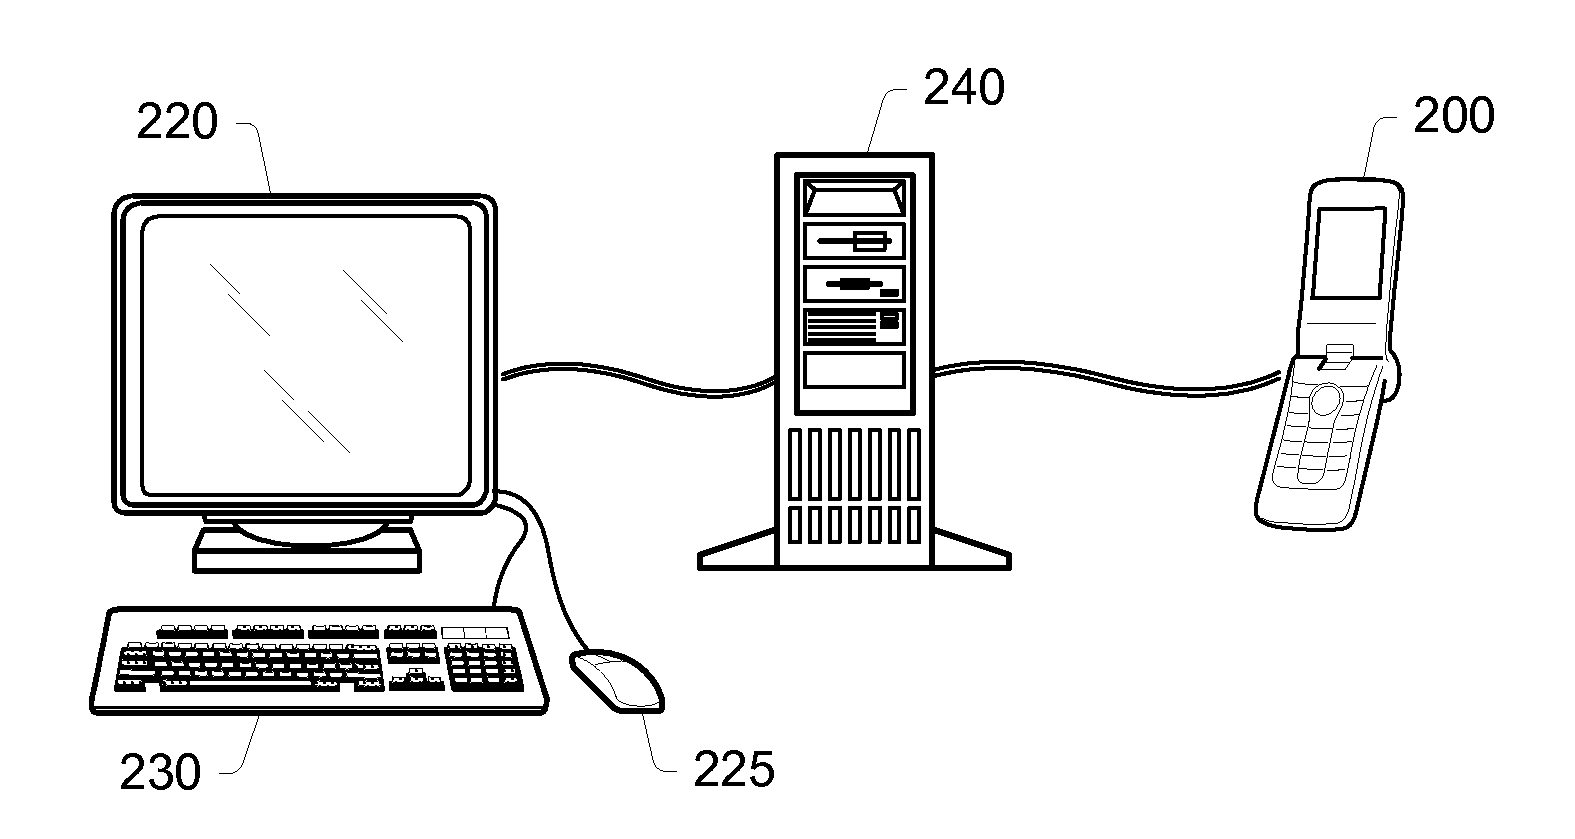 System and Method for Enumerating a USB Device Using Low Power